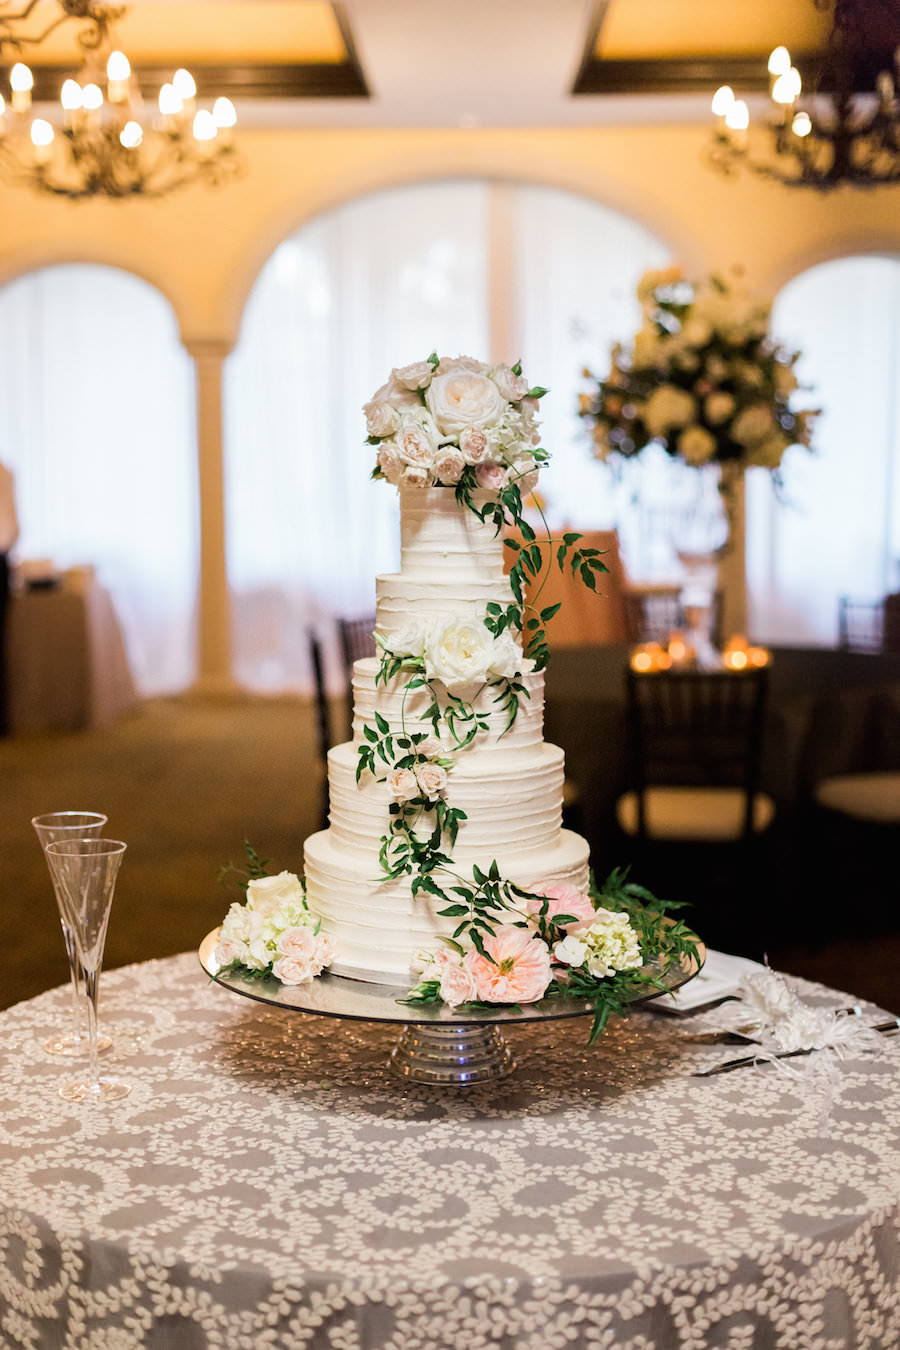 Five Tiered Ivory White Ruffled Wedding Cake with Fresh Ivory and Pink Floral Accent with Green Vine | Tampa Wedding Cakes and Desserts Hands on Sweets